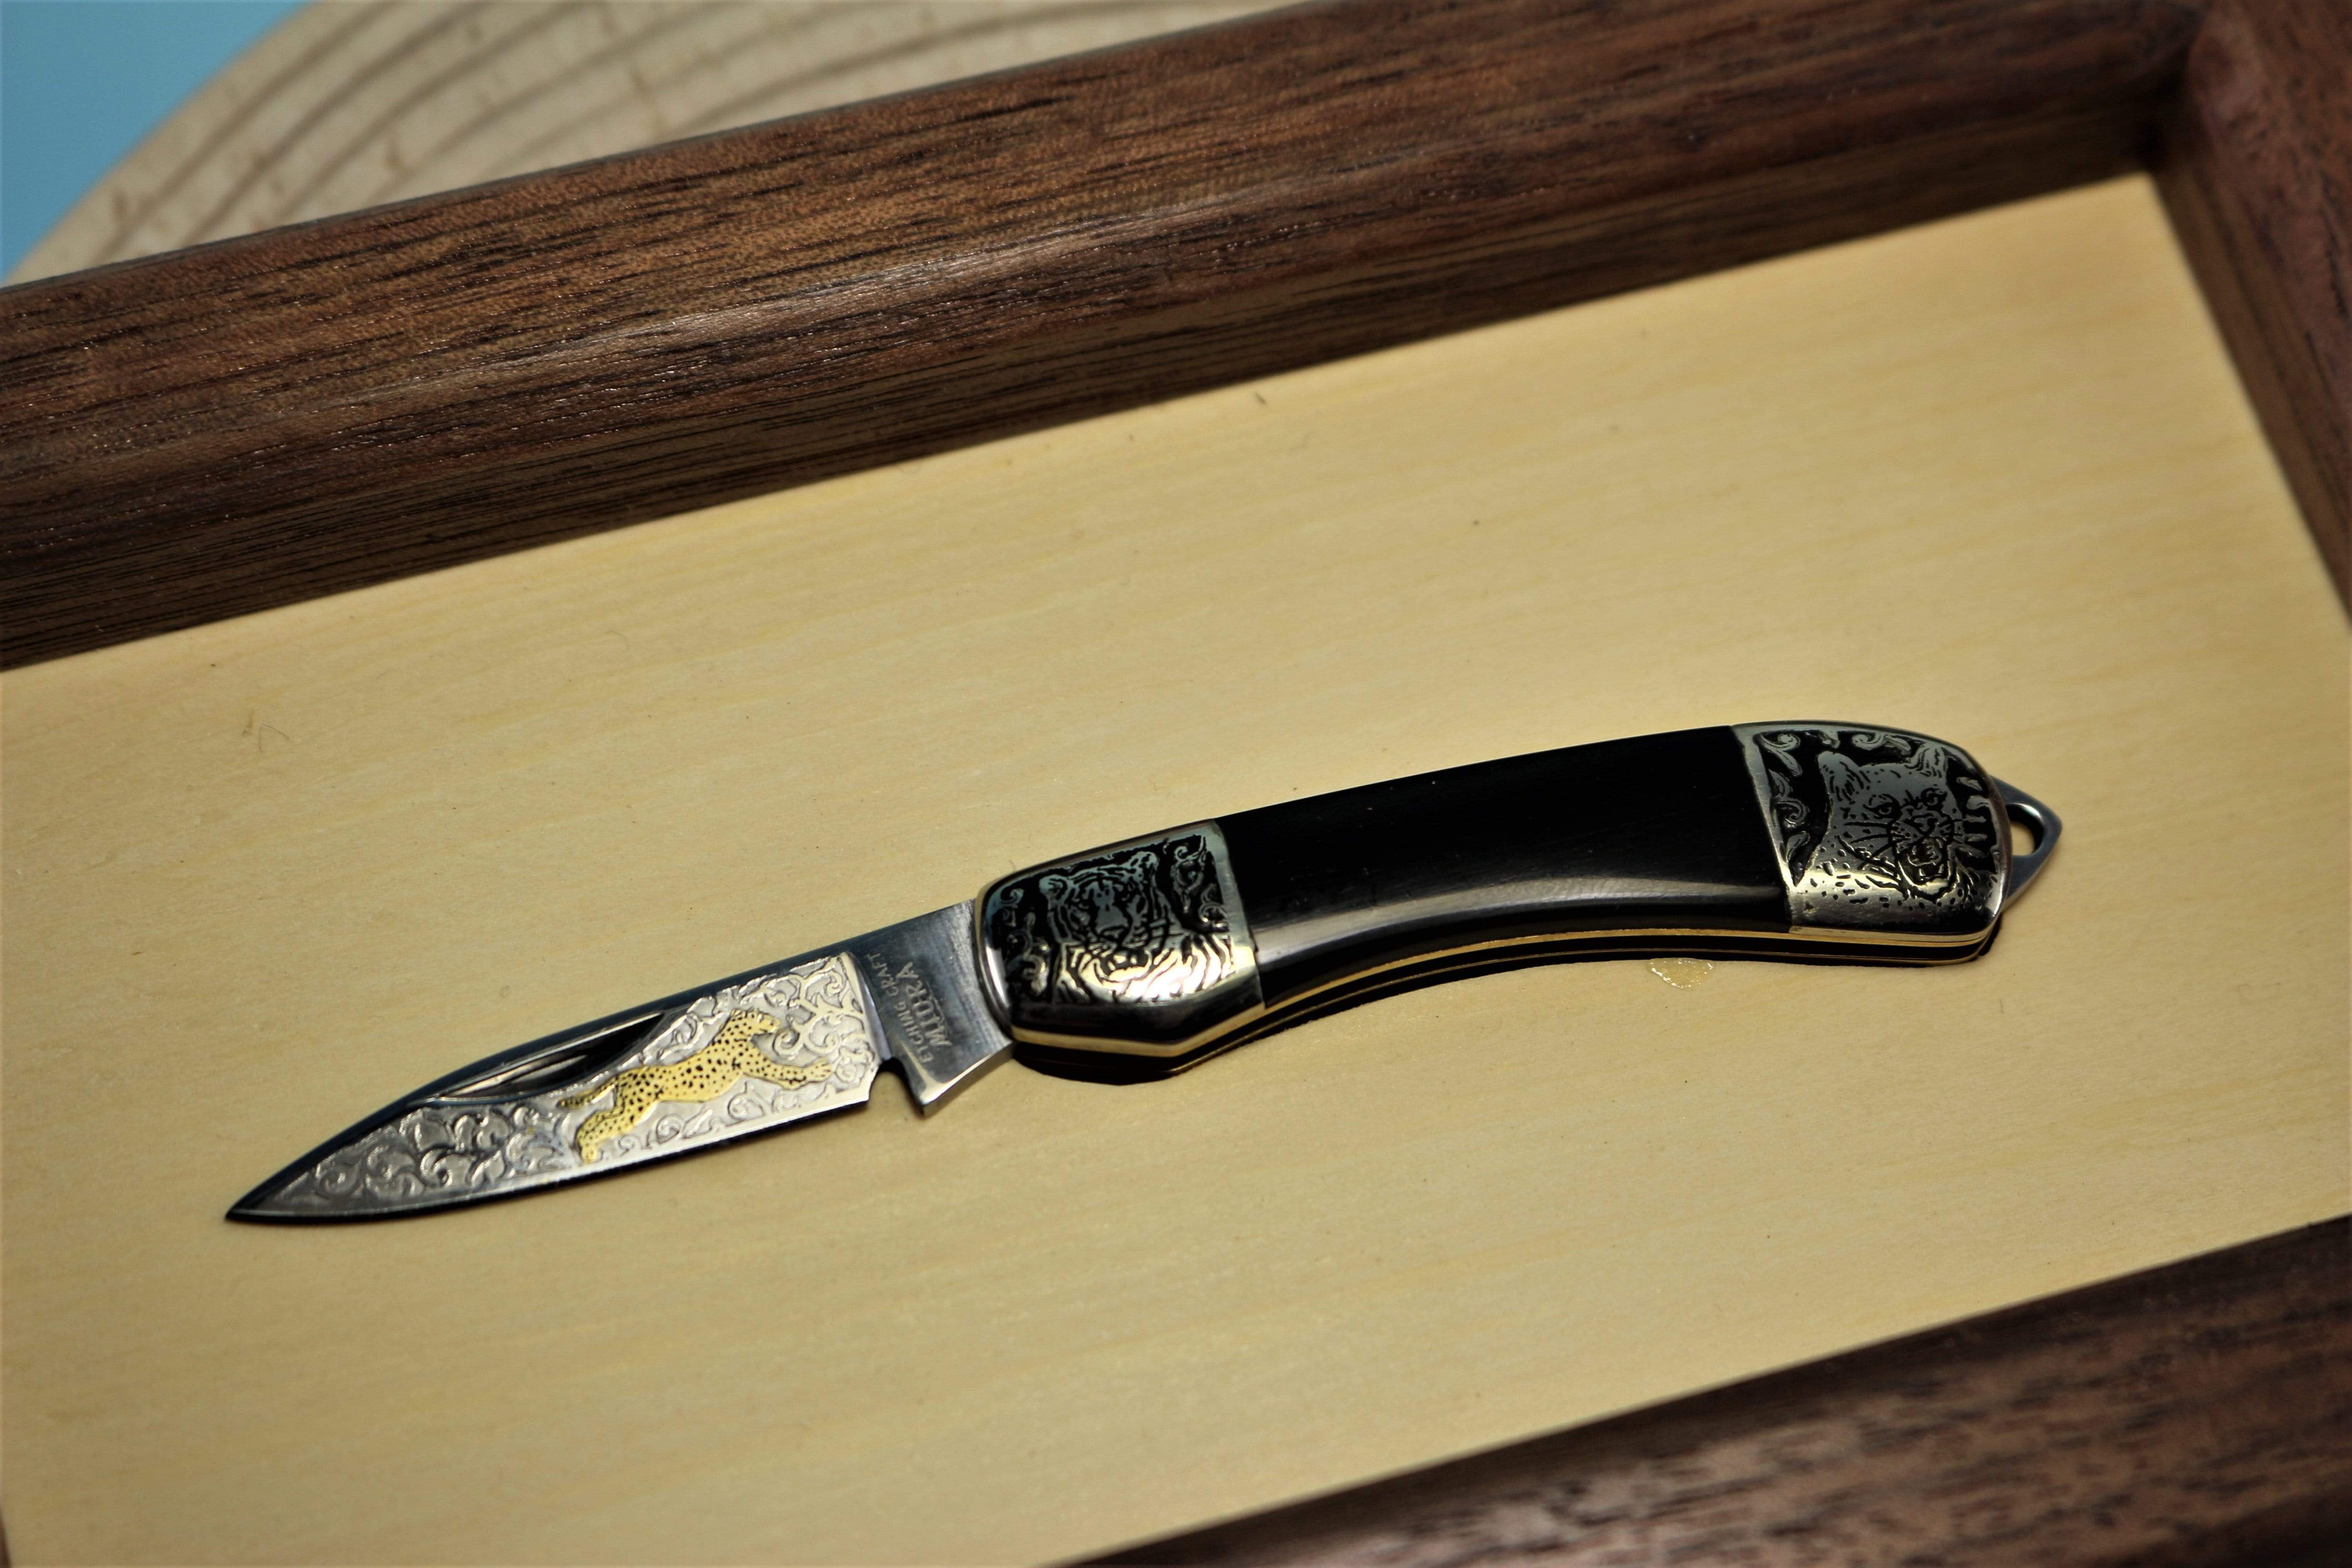 Very cool chisel knife. Extremely useful knife/tool. : r/knifeclub